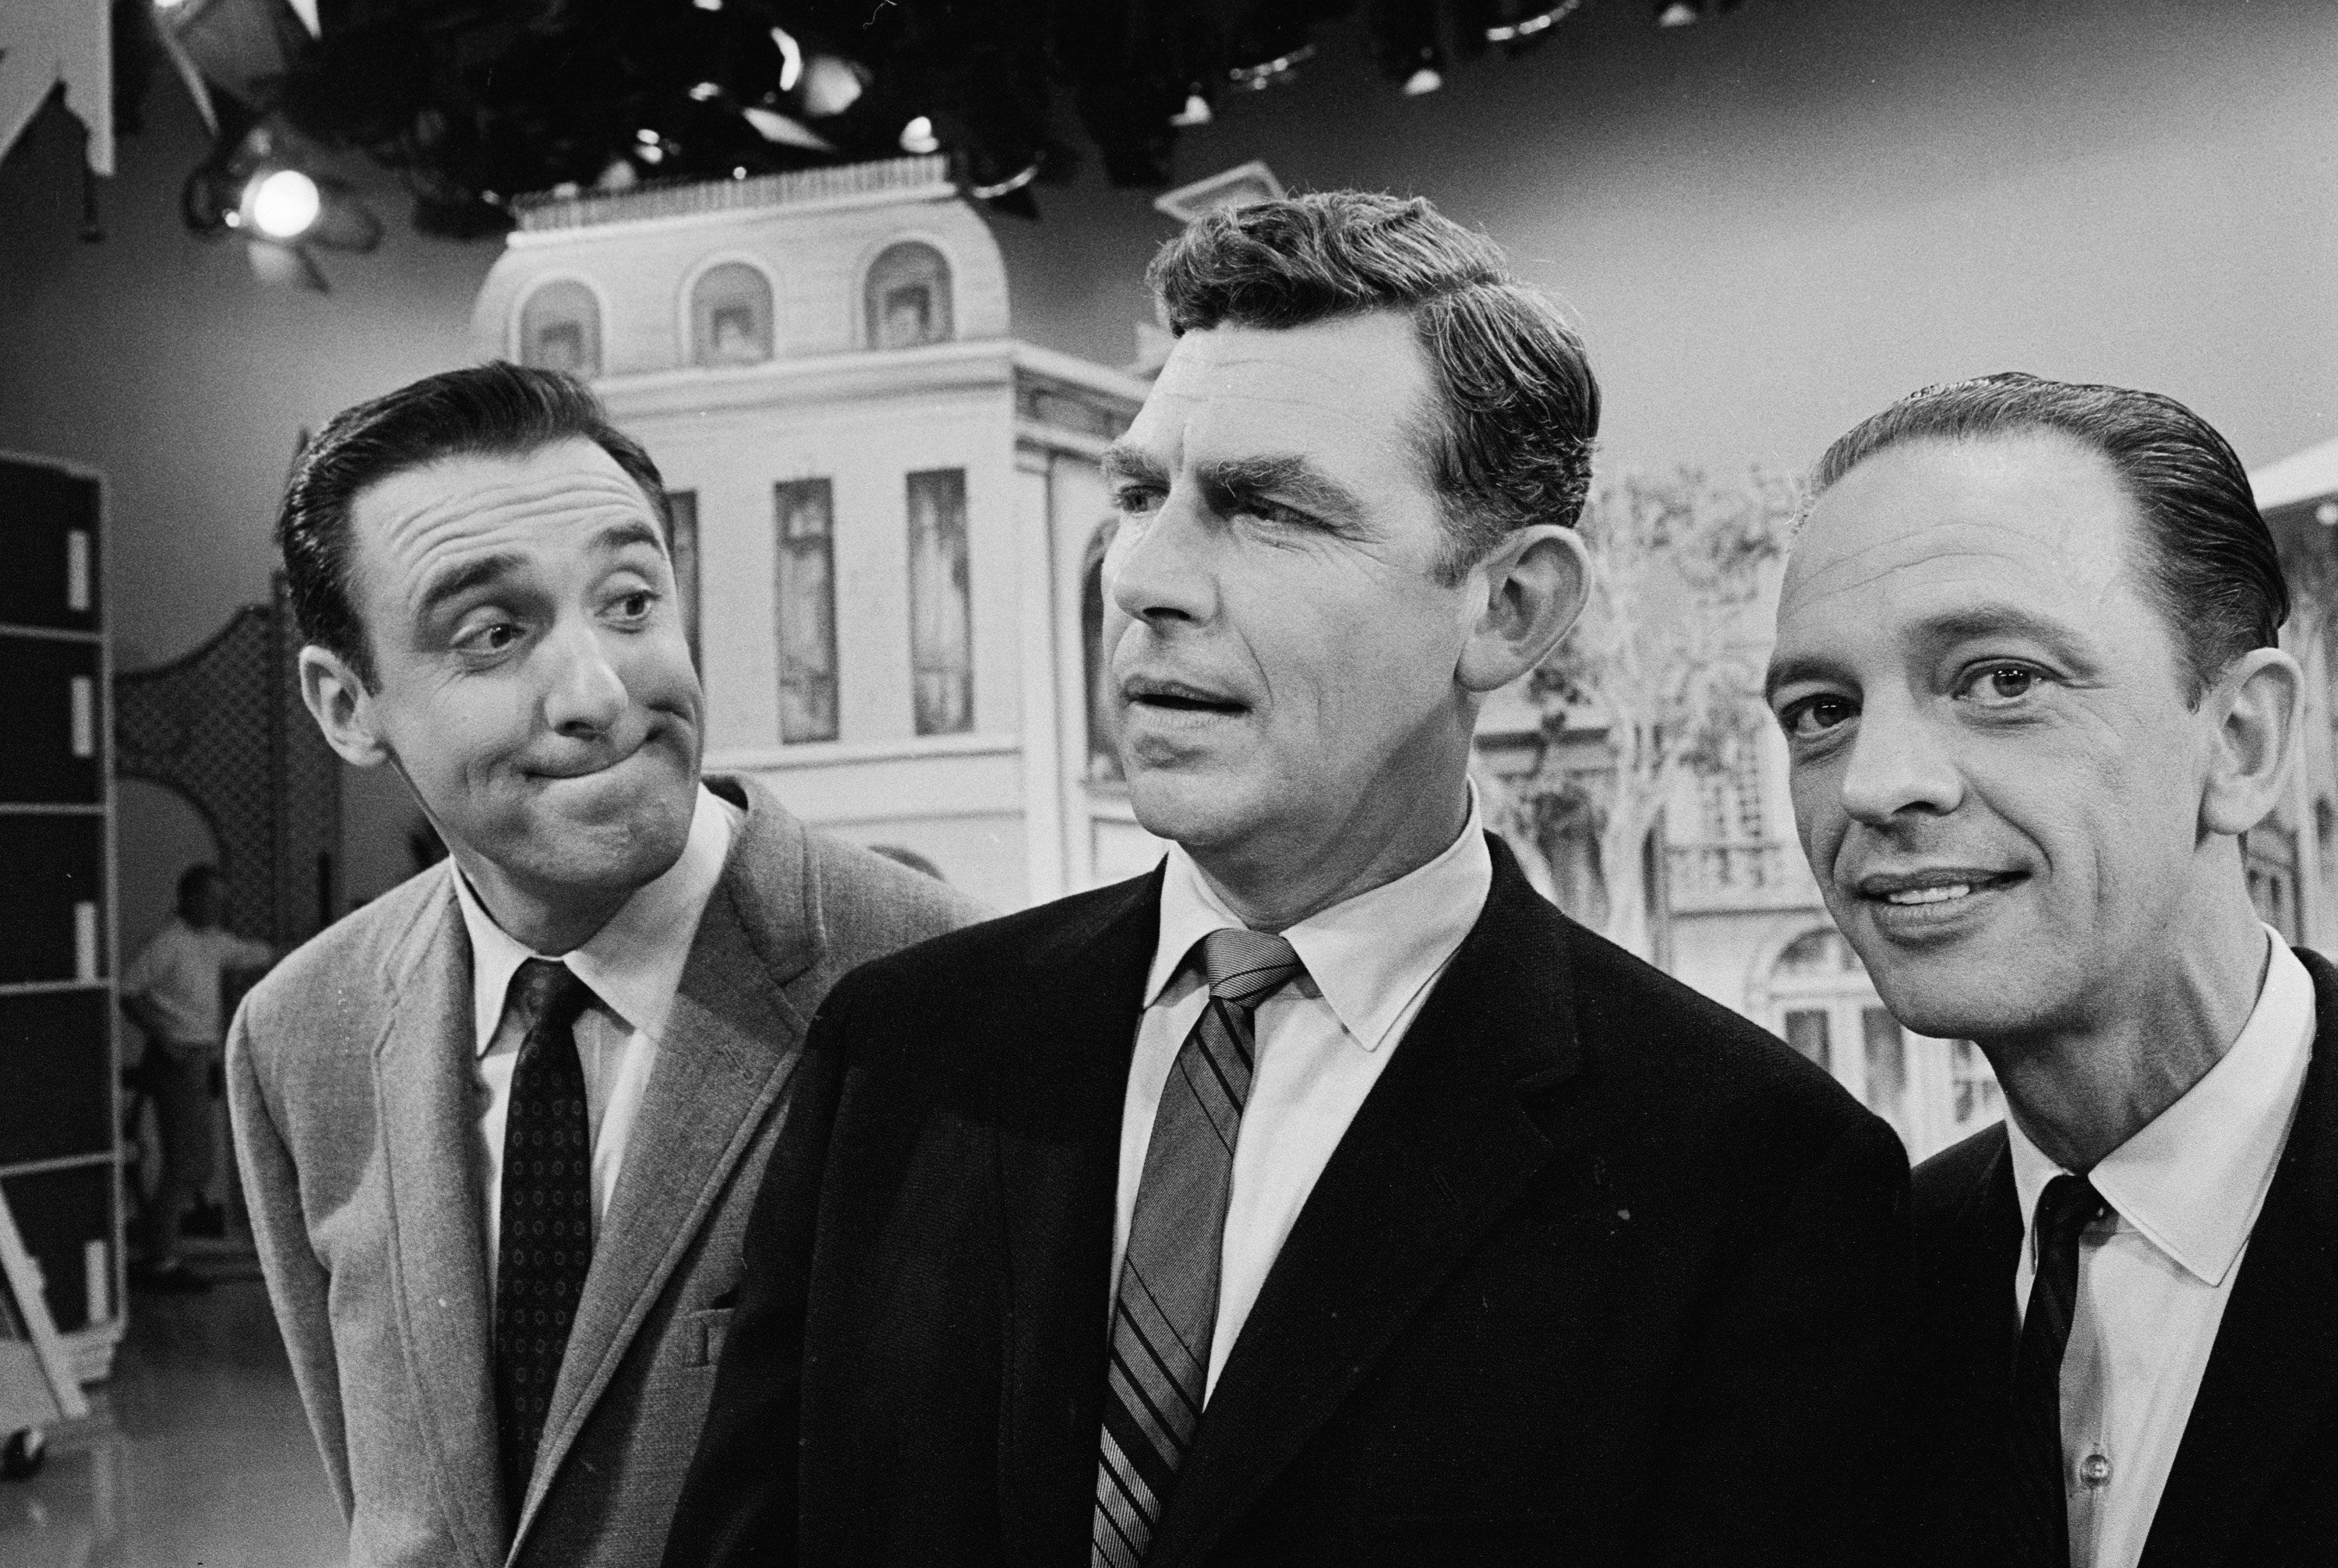 Actors Jim Nabors, Andy Griffith, and Don Knotts of 'The Andy Griffith Show' pose for a photo, 1965